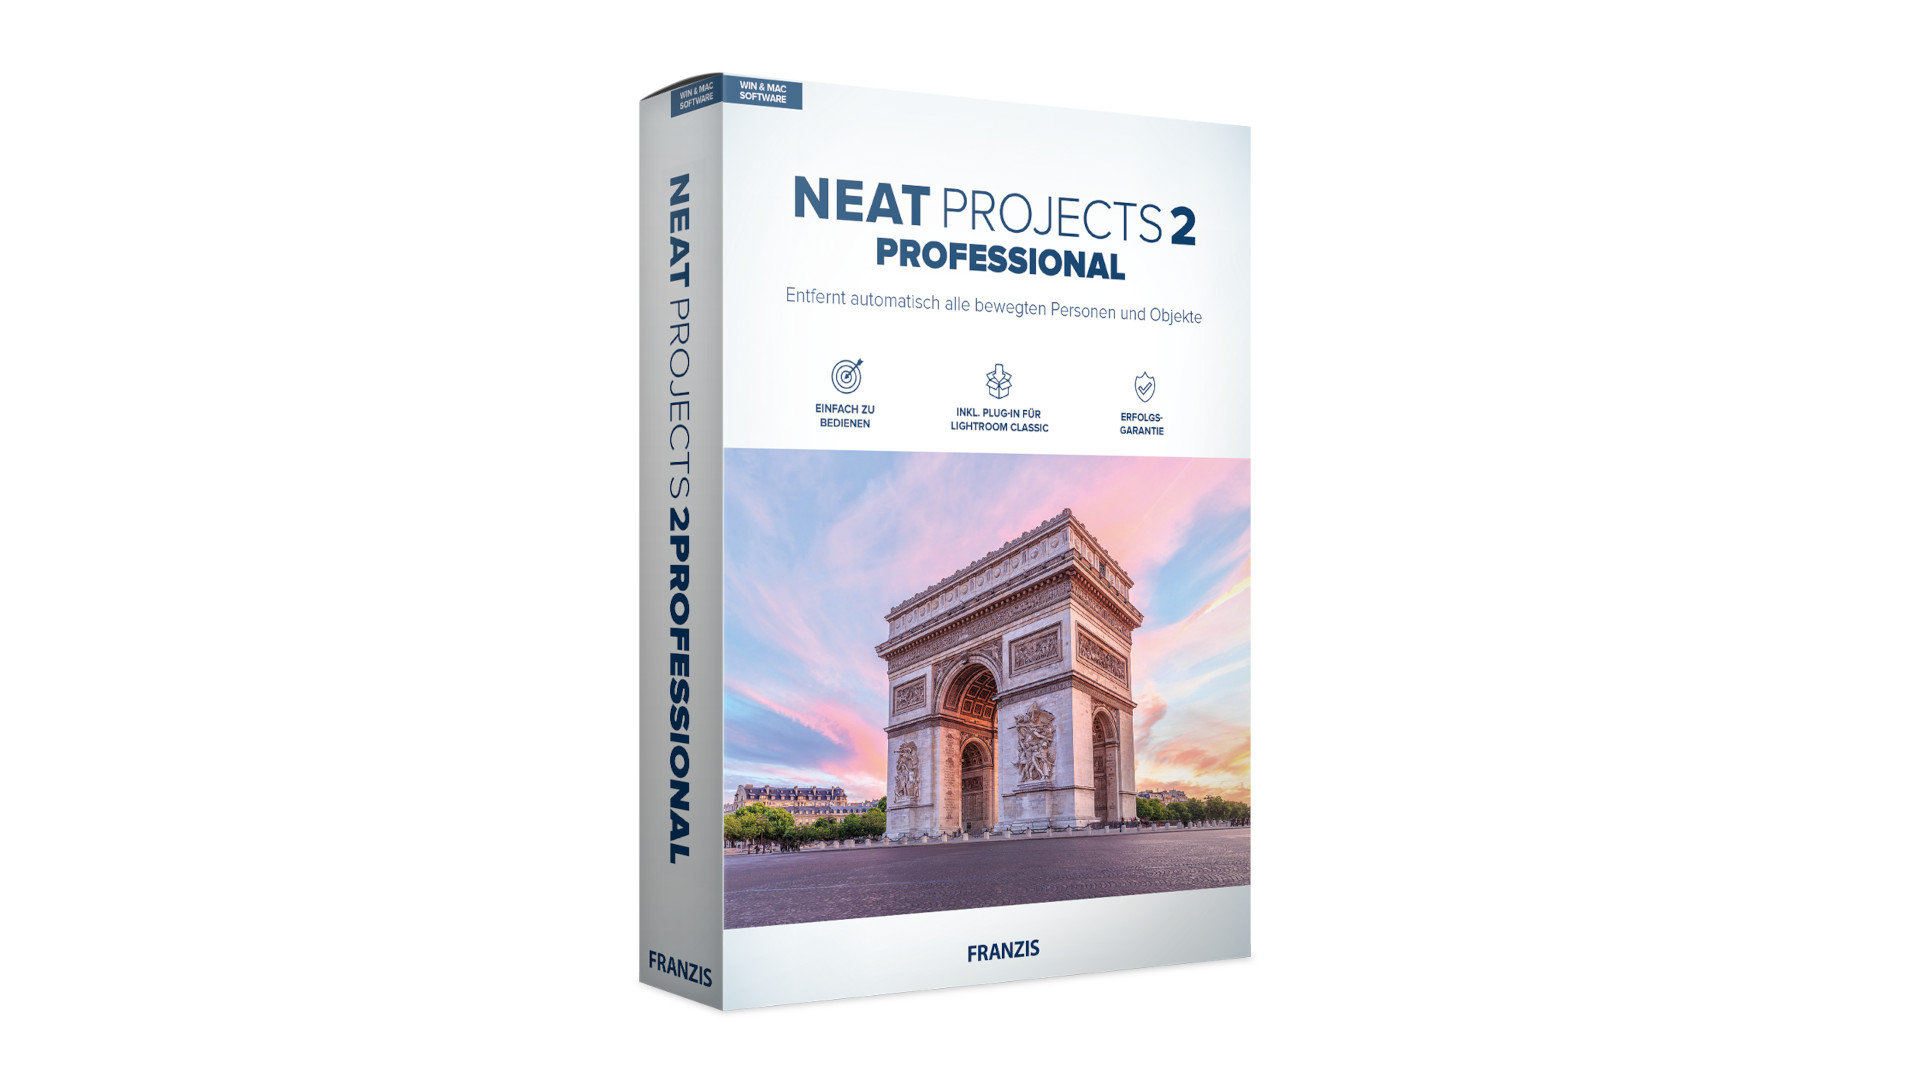 NEAT projects 2 Pro - Project Software Key (Lifetime / 1 PC) $33.89